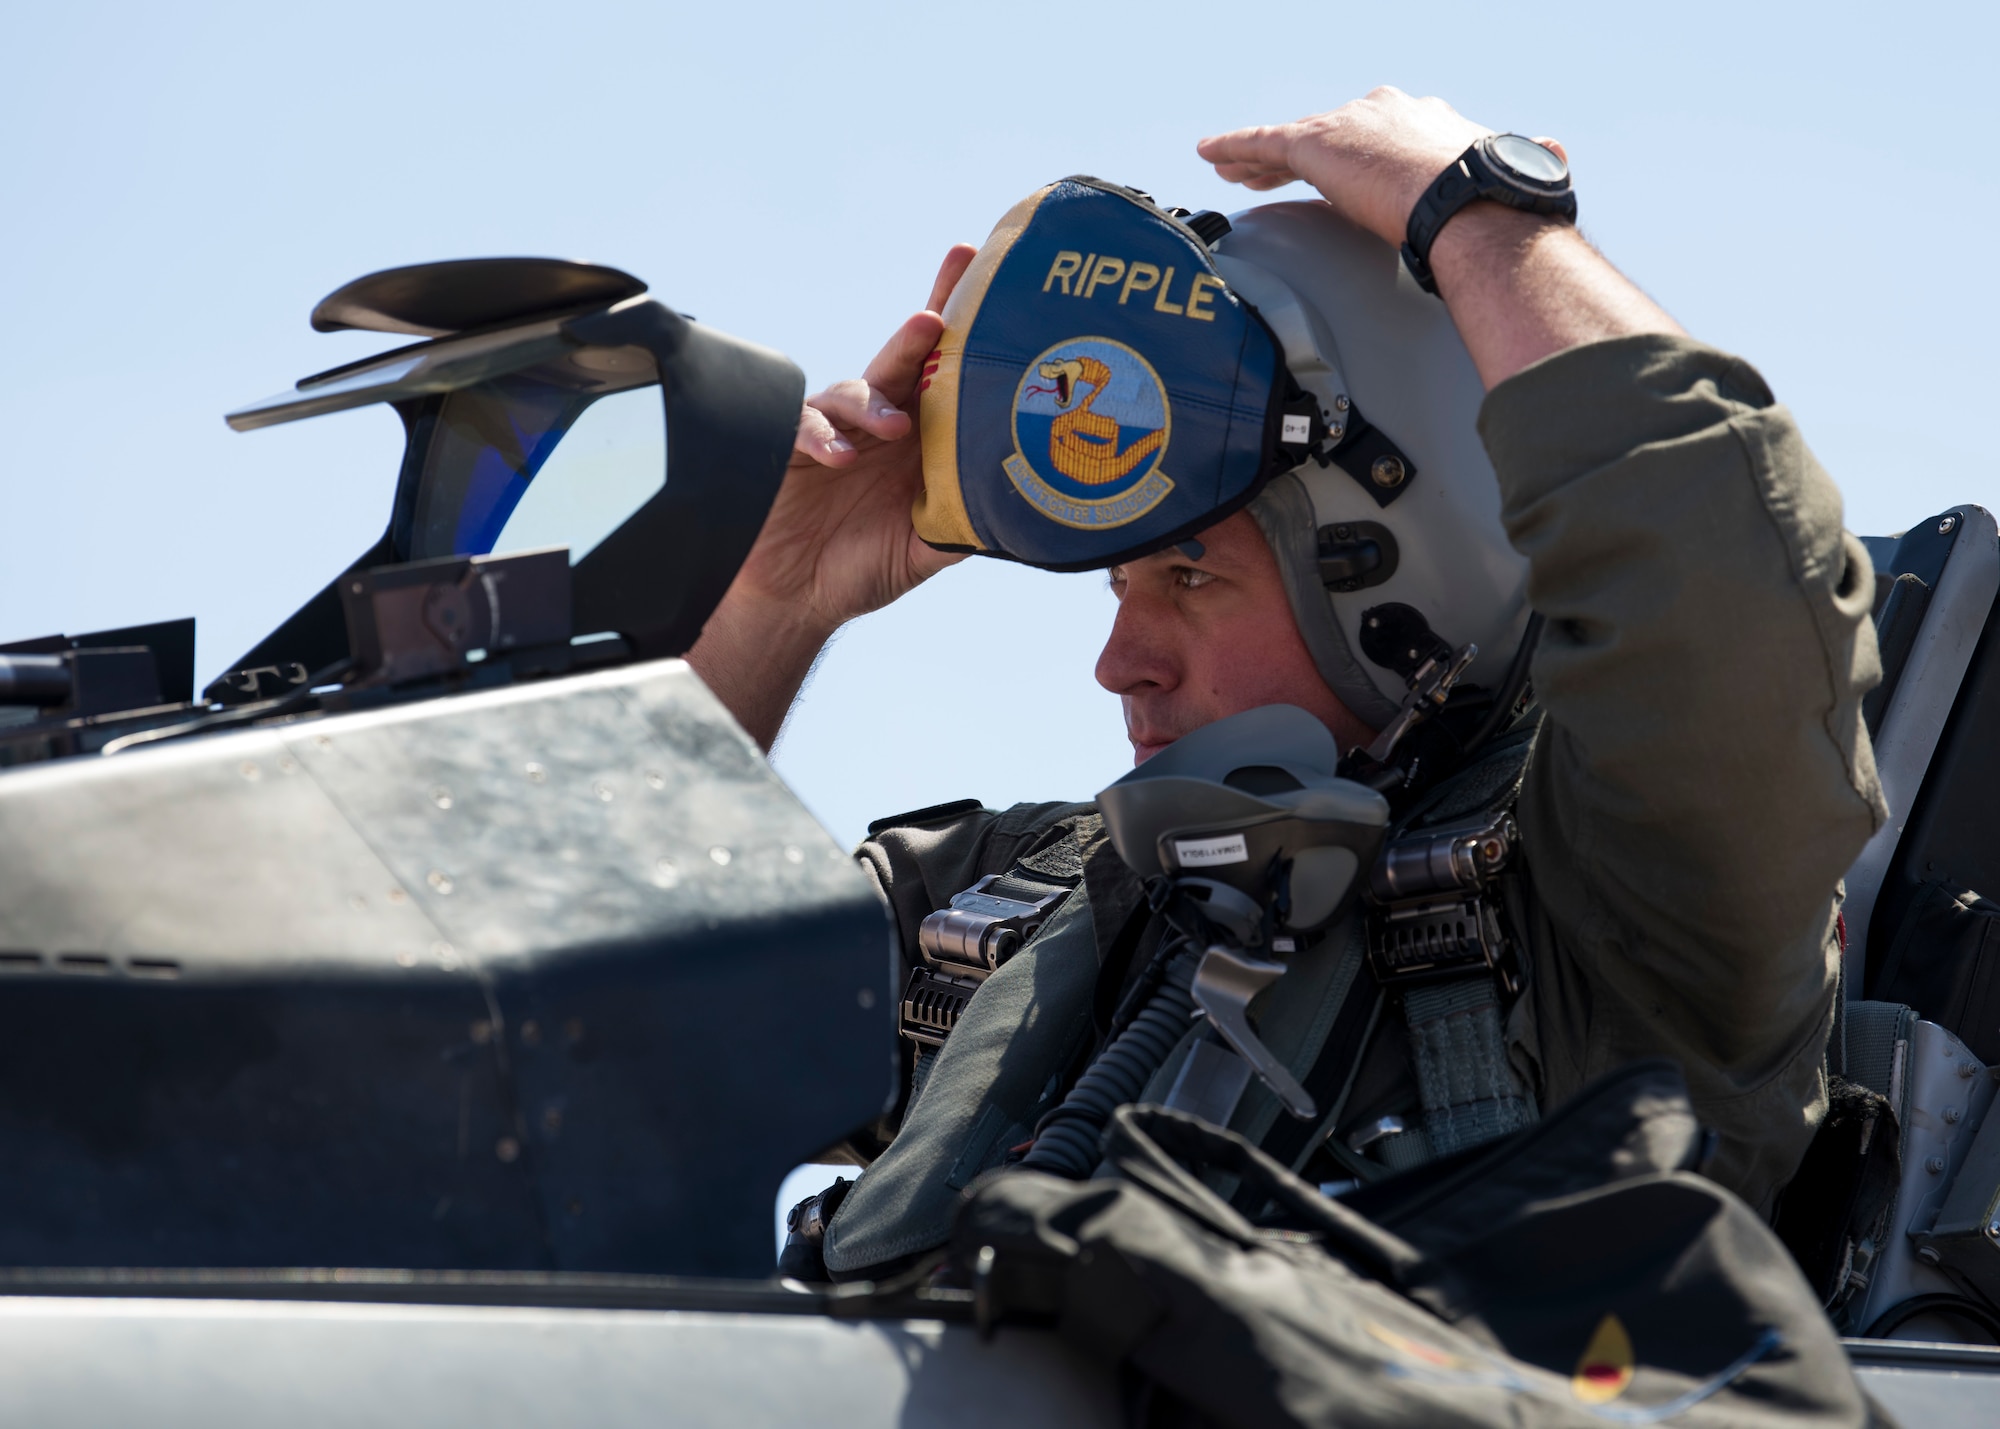 Maj. Jon Farragher, 311th Fighter Squadron assistant director of operations, dons his helmet before flying a familiarization flight for Airman 1st Class Mequail Fridge, April 25, 2019, on Hill Air Force Base, Utah. The goal of a FAM flight is to educate ground personnel about their impact on the mission. (U.S. Air Force photo by Staff Sgt. BreeAnn Sachs)